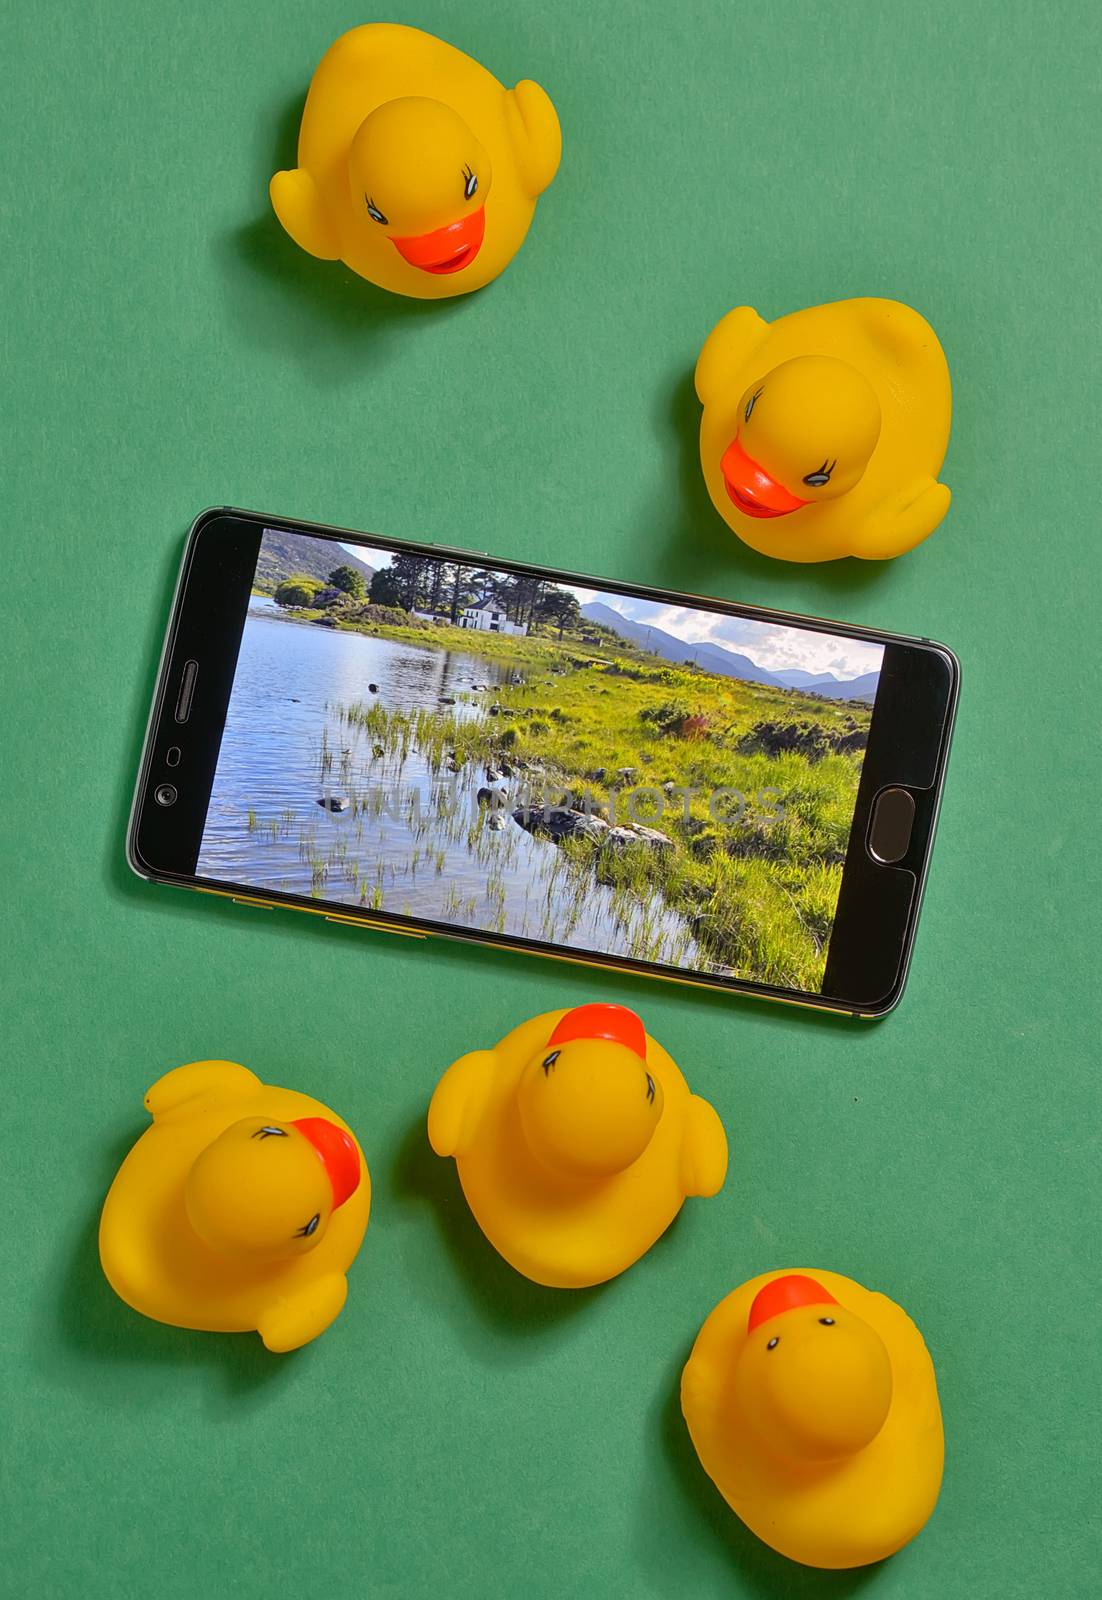 Yellow rubber duck and smartphone concept by jordachelr